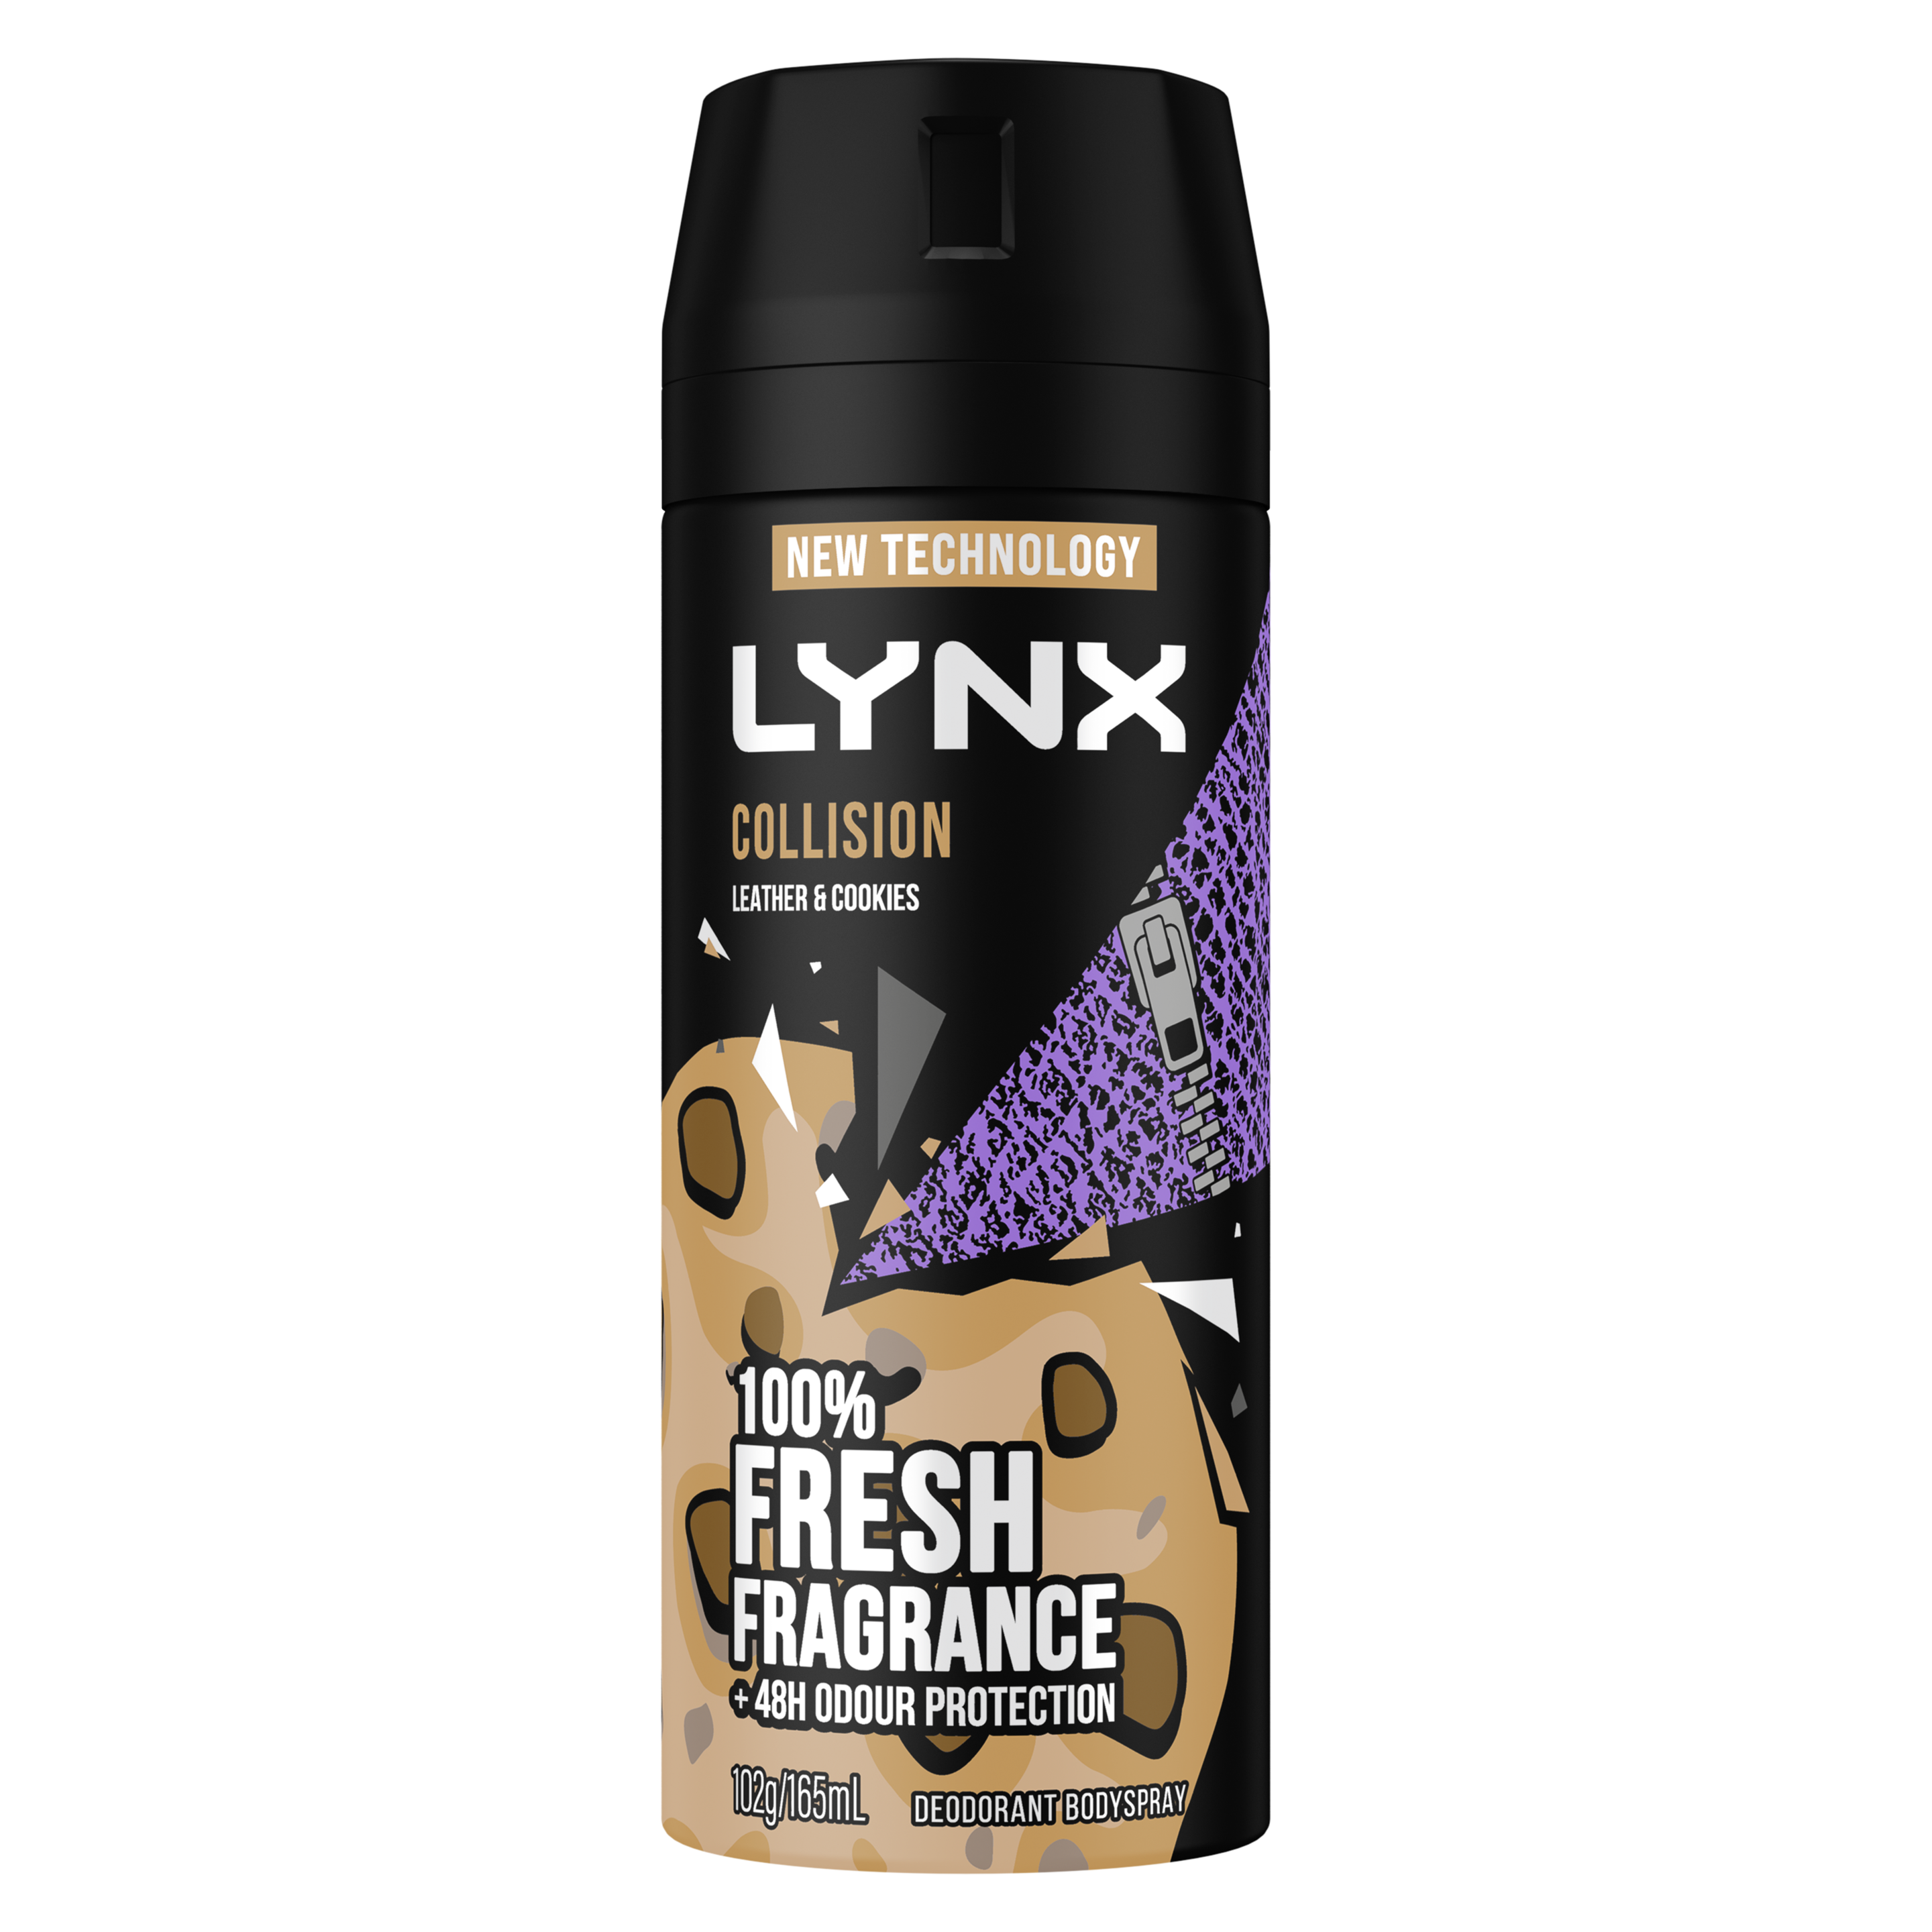 Lynx Collisions Leather + Cookies Body Spray